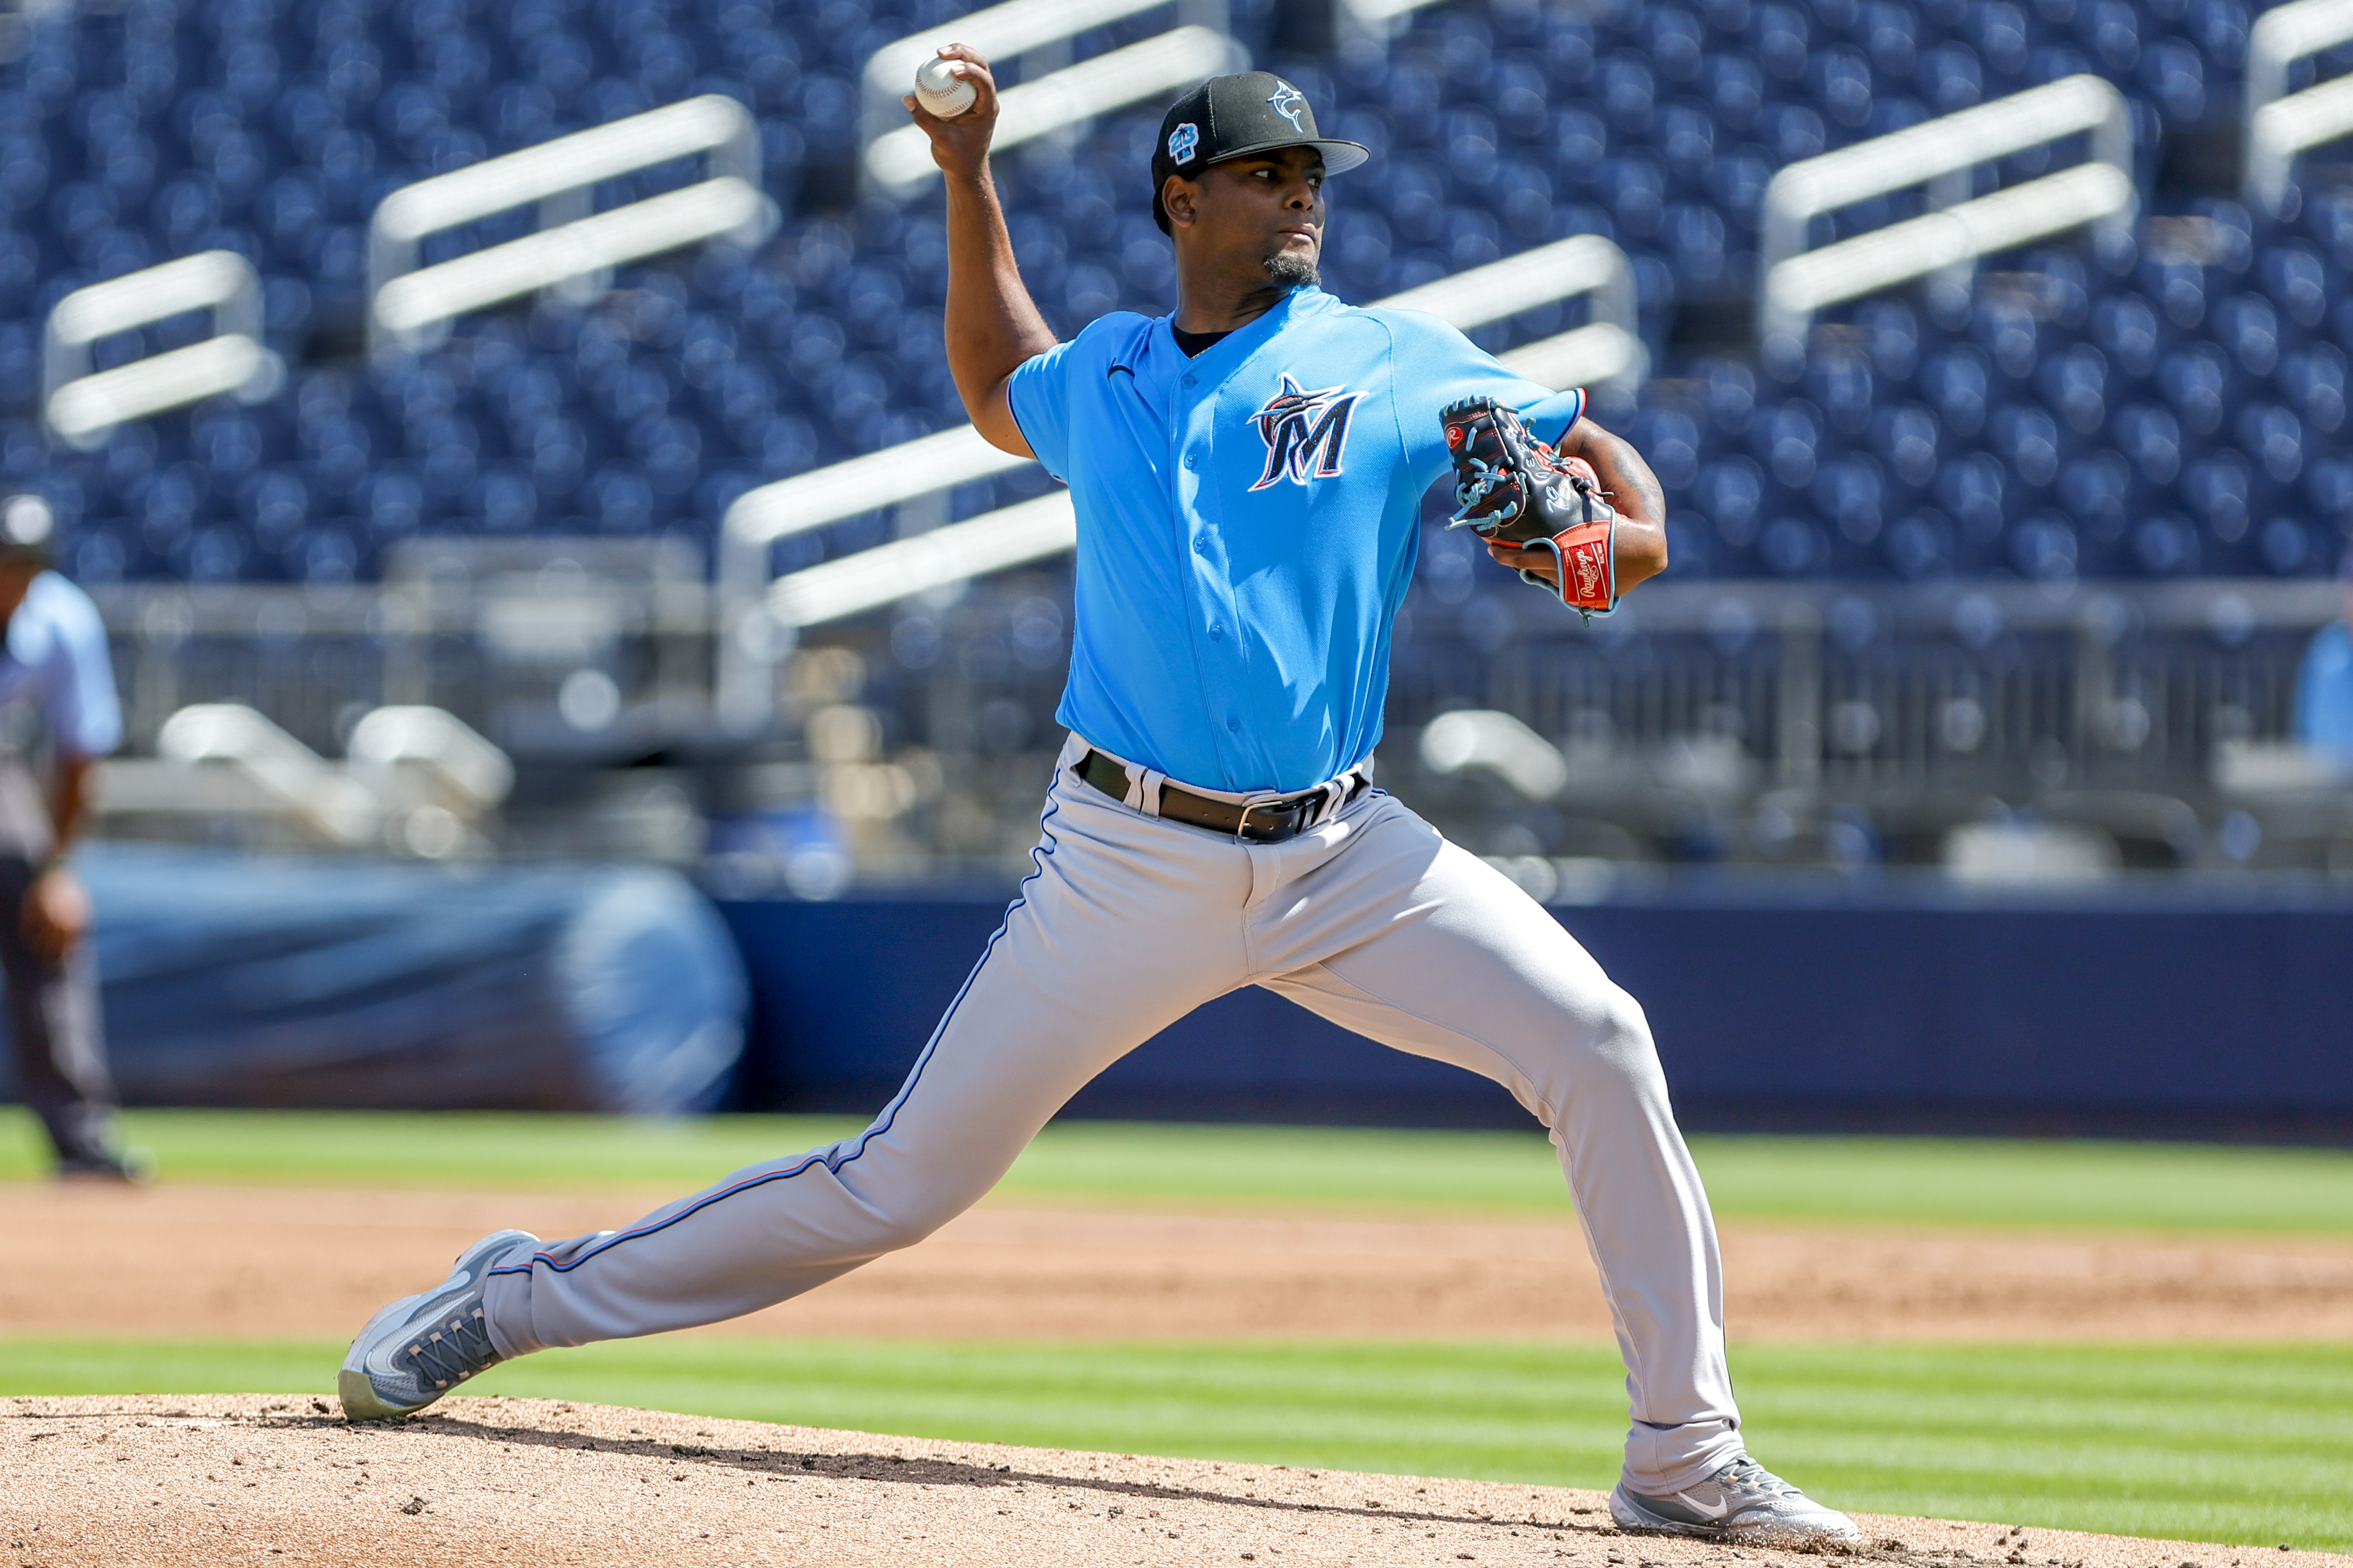 West Palm Beach, Florida, USA; Miami Marlins starting pitcher Edward Cabrera (27) delivers a pitch during the first inning against the Washington Nationals at The Ballpark of the Palm Beaches.